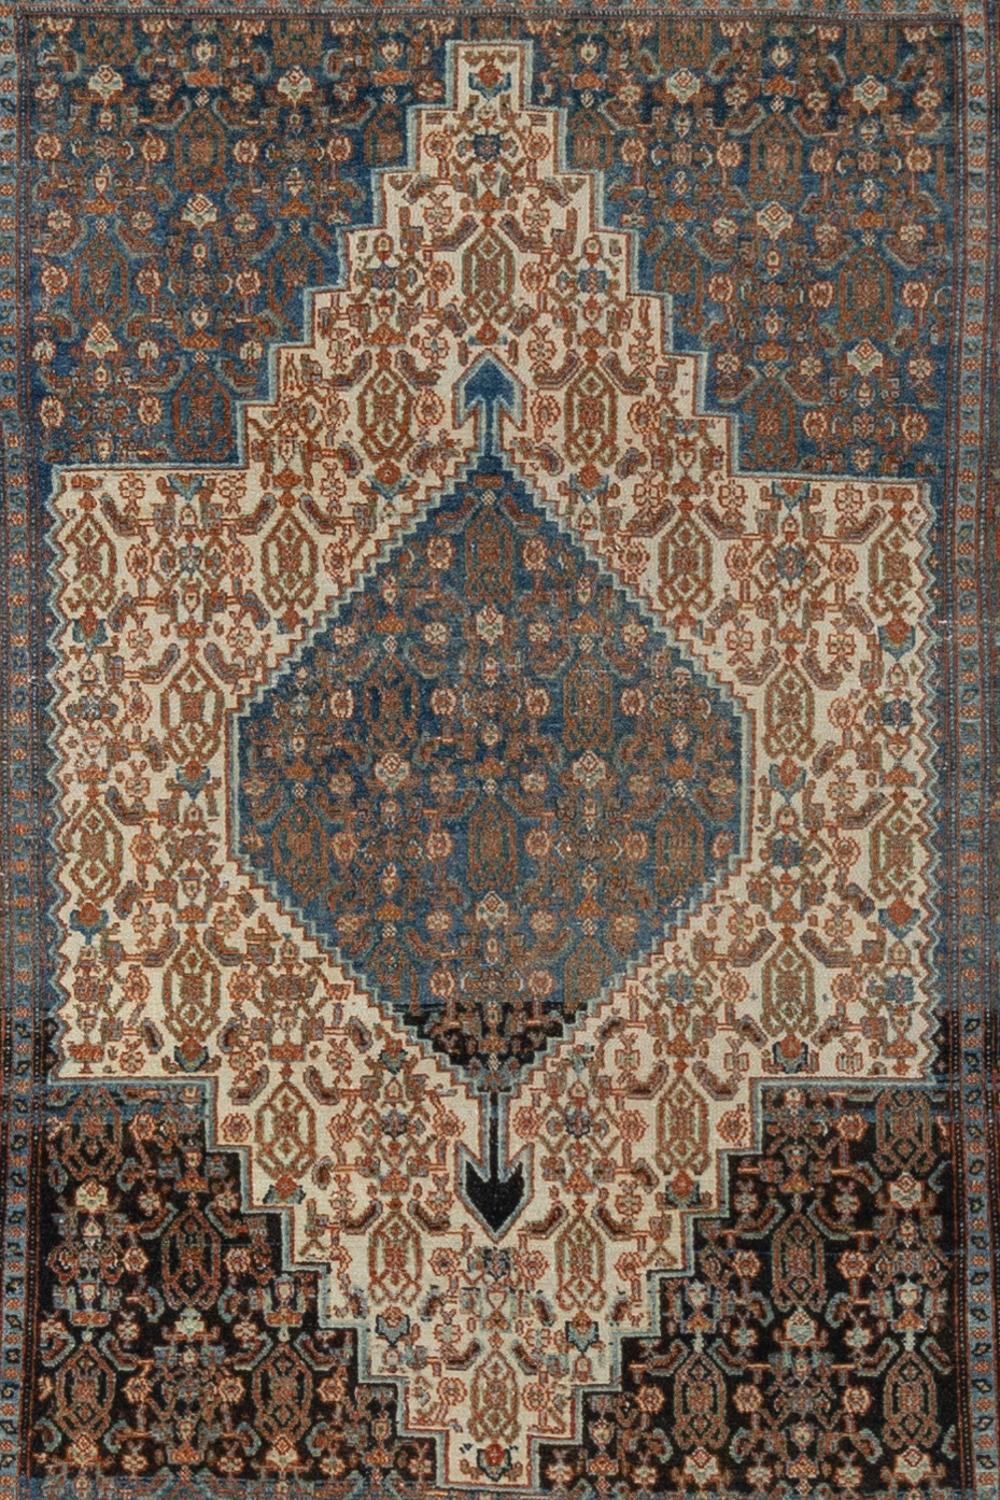 Age: 1920

Pile: Low-medium 

Wear Notes: 0

Material: Wool on Cotton

Wear Guide:
Vintage and antique rugs are by nature, pre-loved and may show evidence of their past. There are varying degrees of wear to vintage rugs; some show very